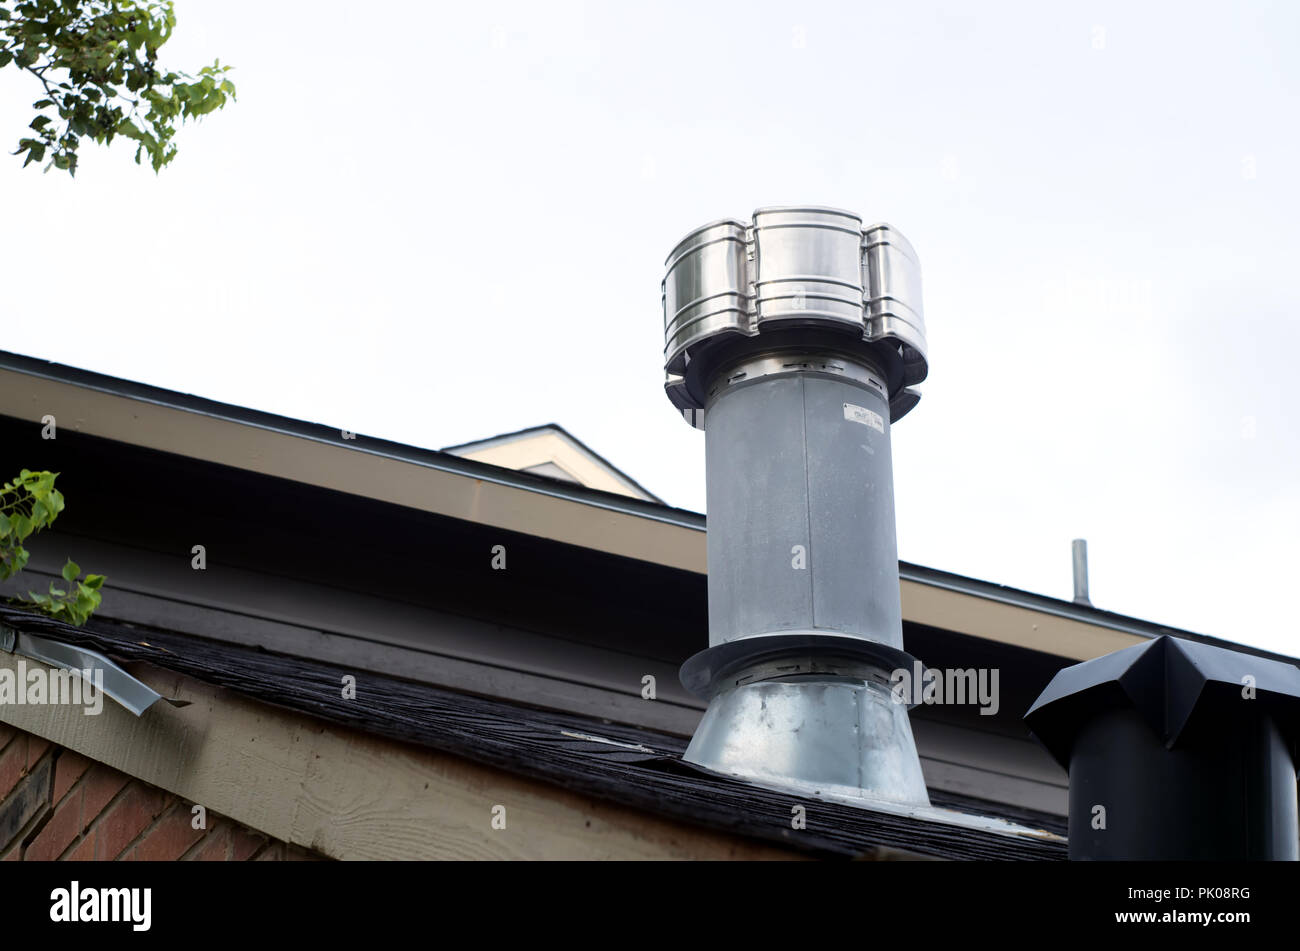 Exhaust stack from a gas fired water boiler mounted on shingled roof. Stock Photo